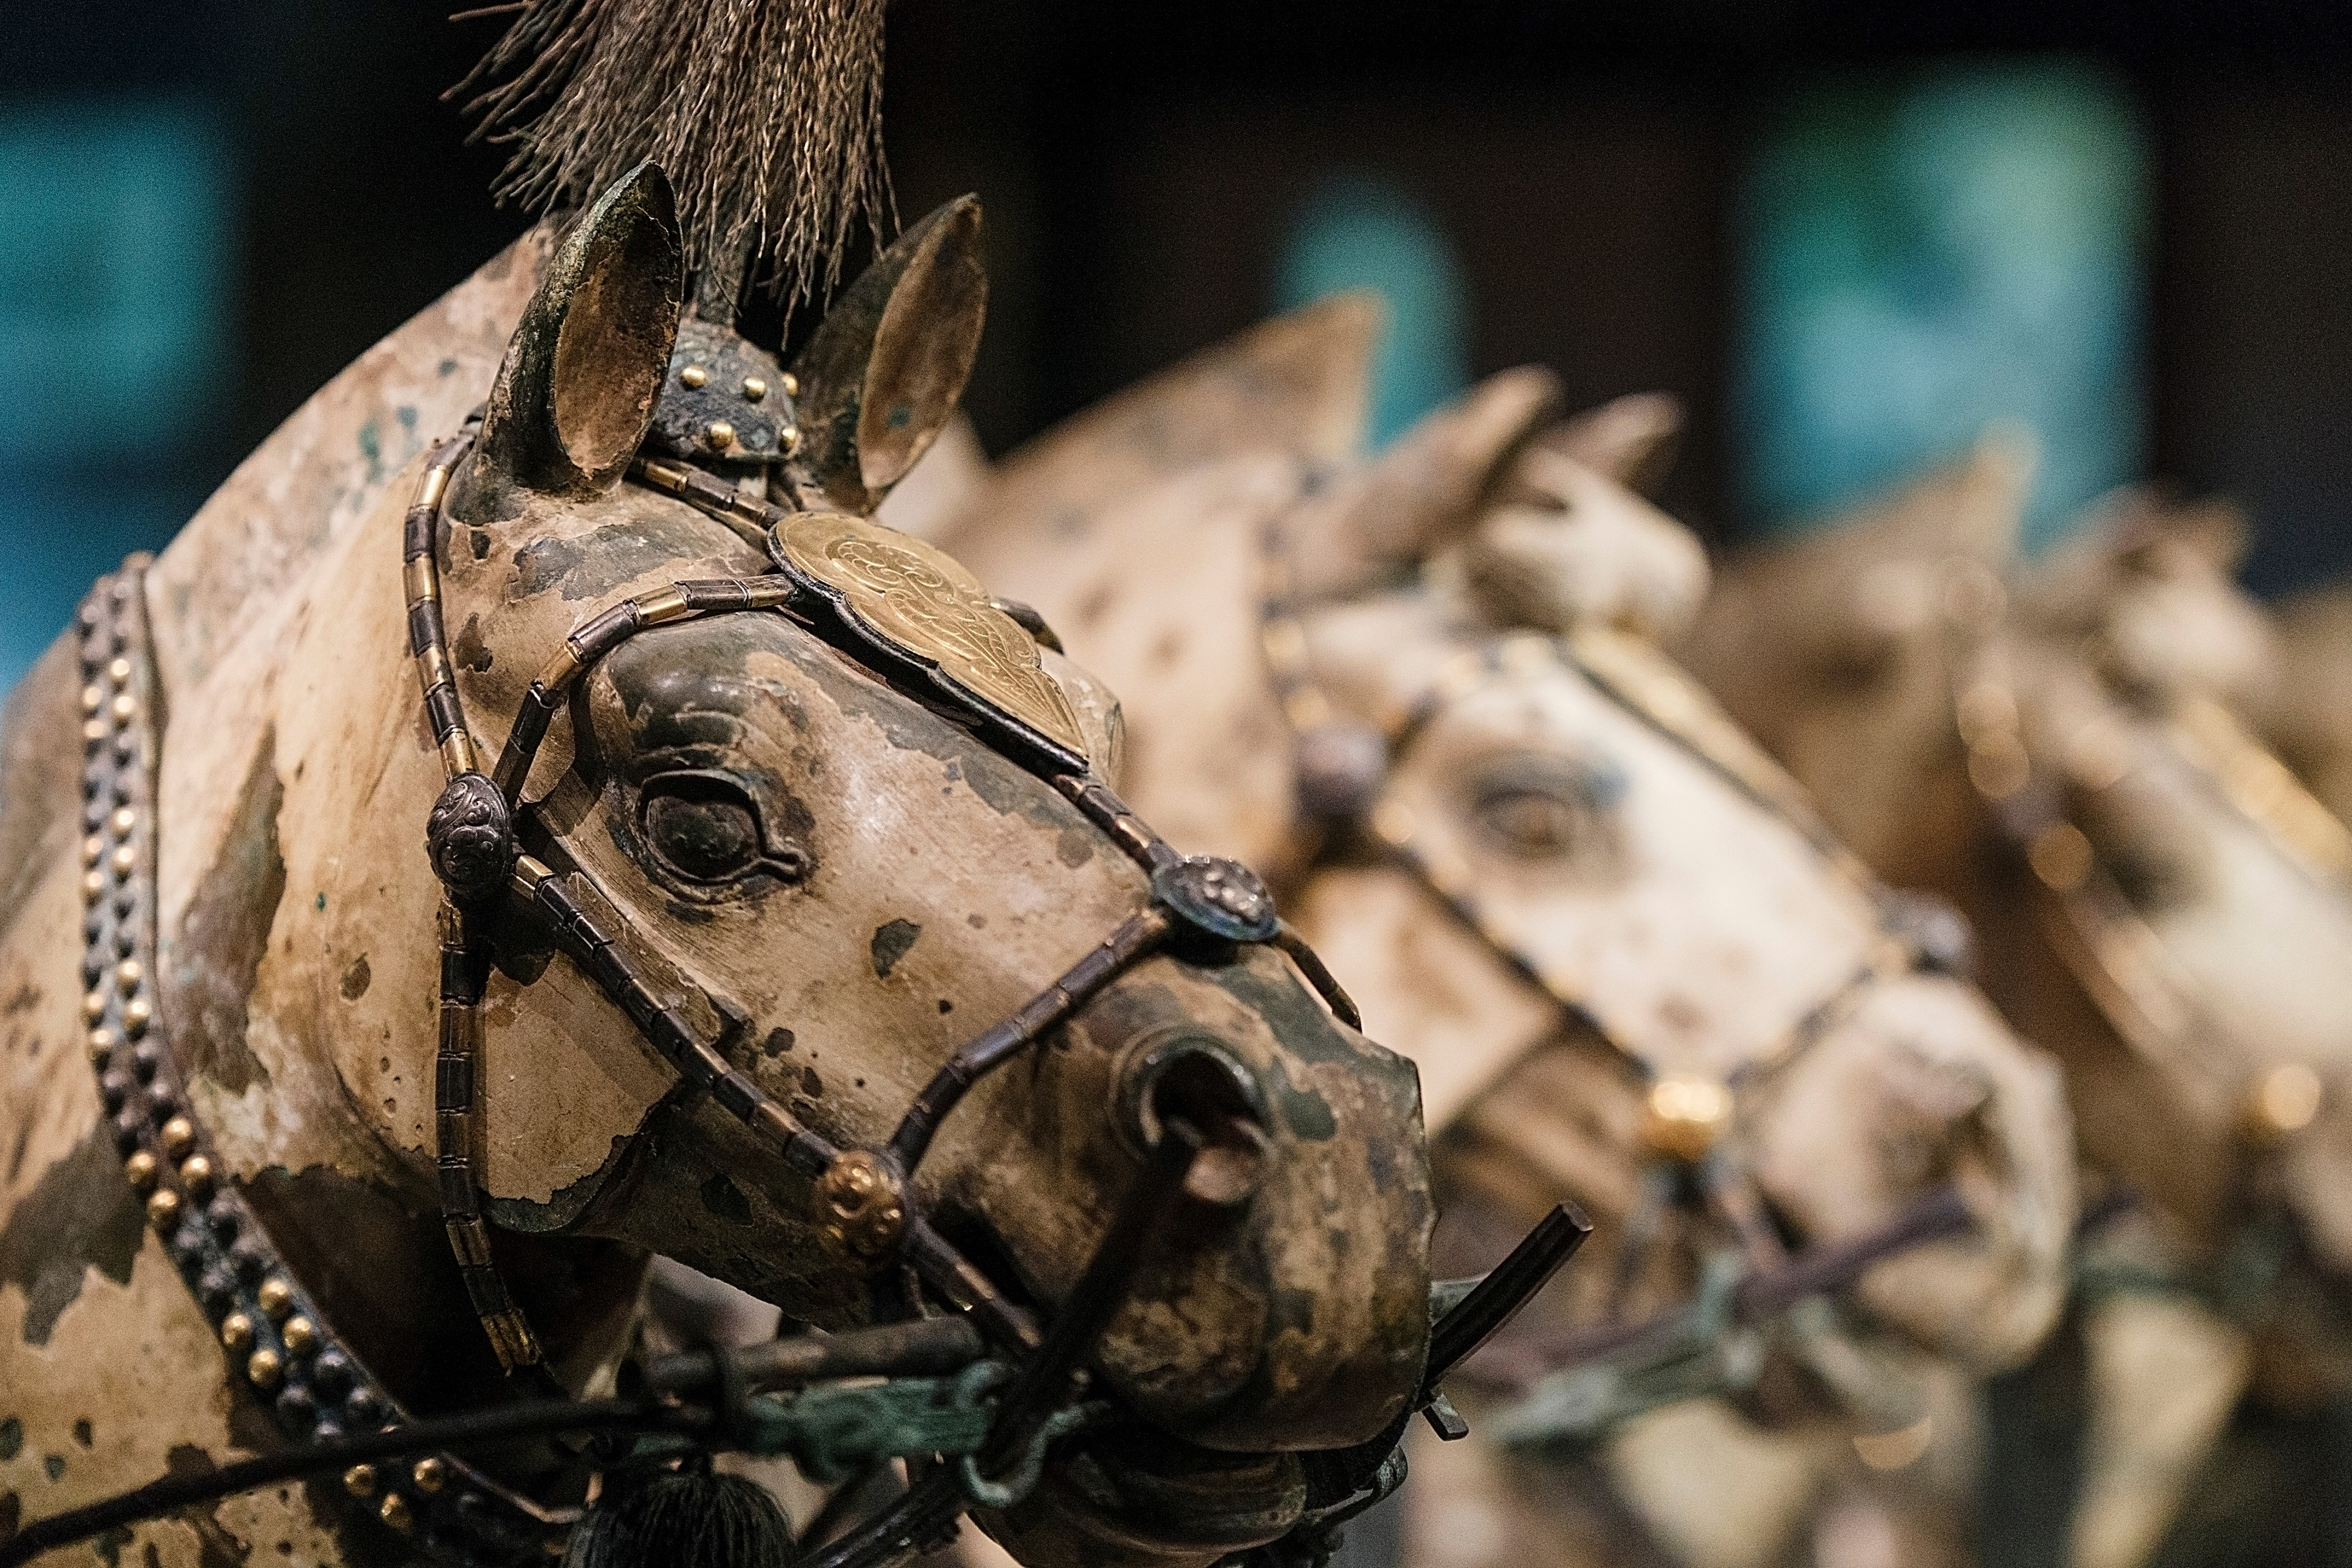 Horses, both real and fake, are a significant part of the Mausoleum of the First Qin Emperor, famous for the Terracotta Army. Photo: Shutterstock